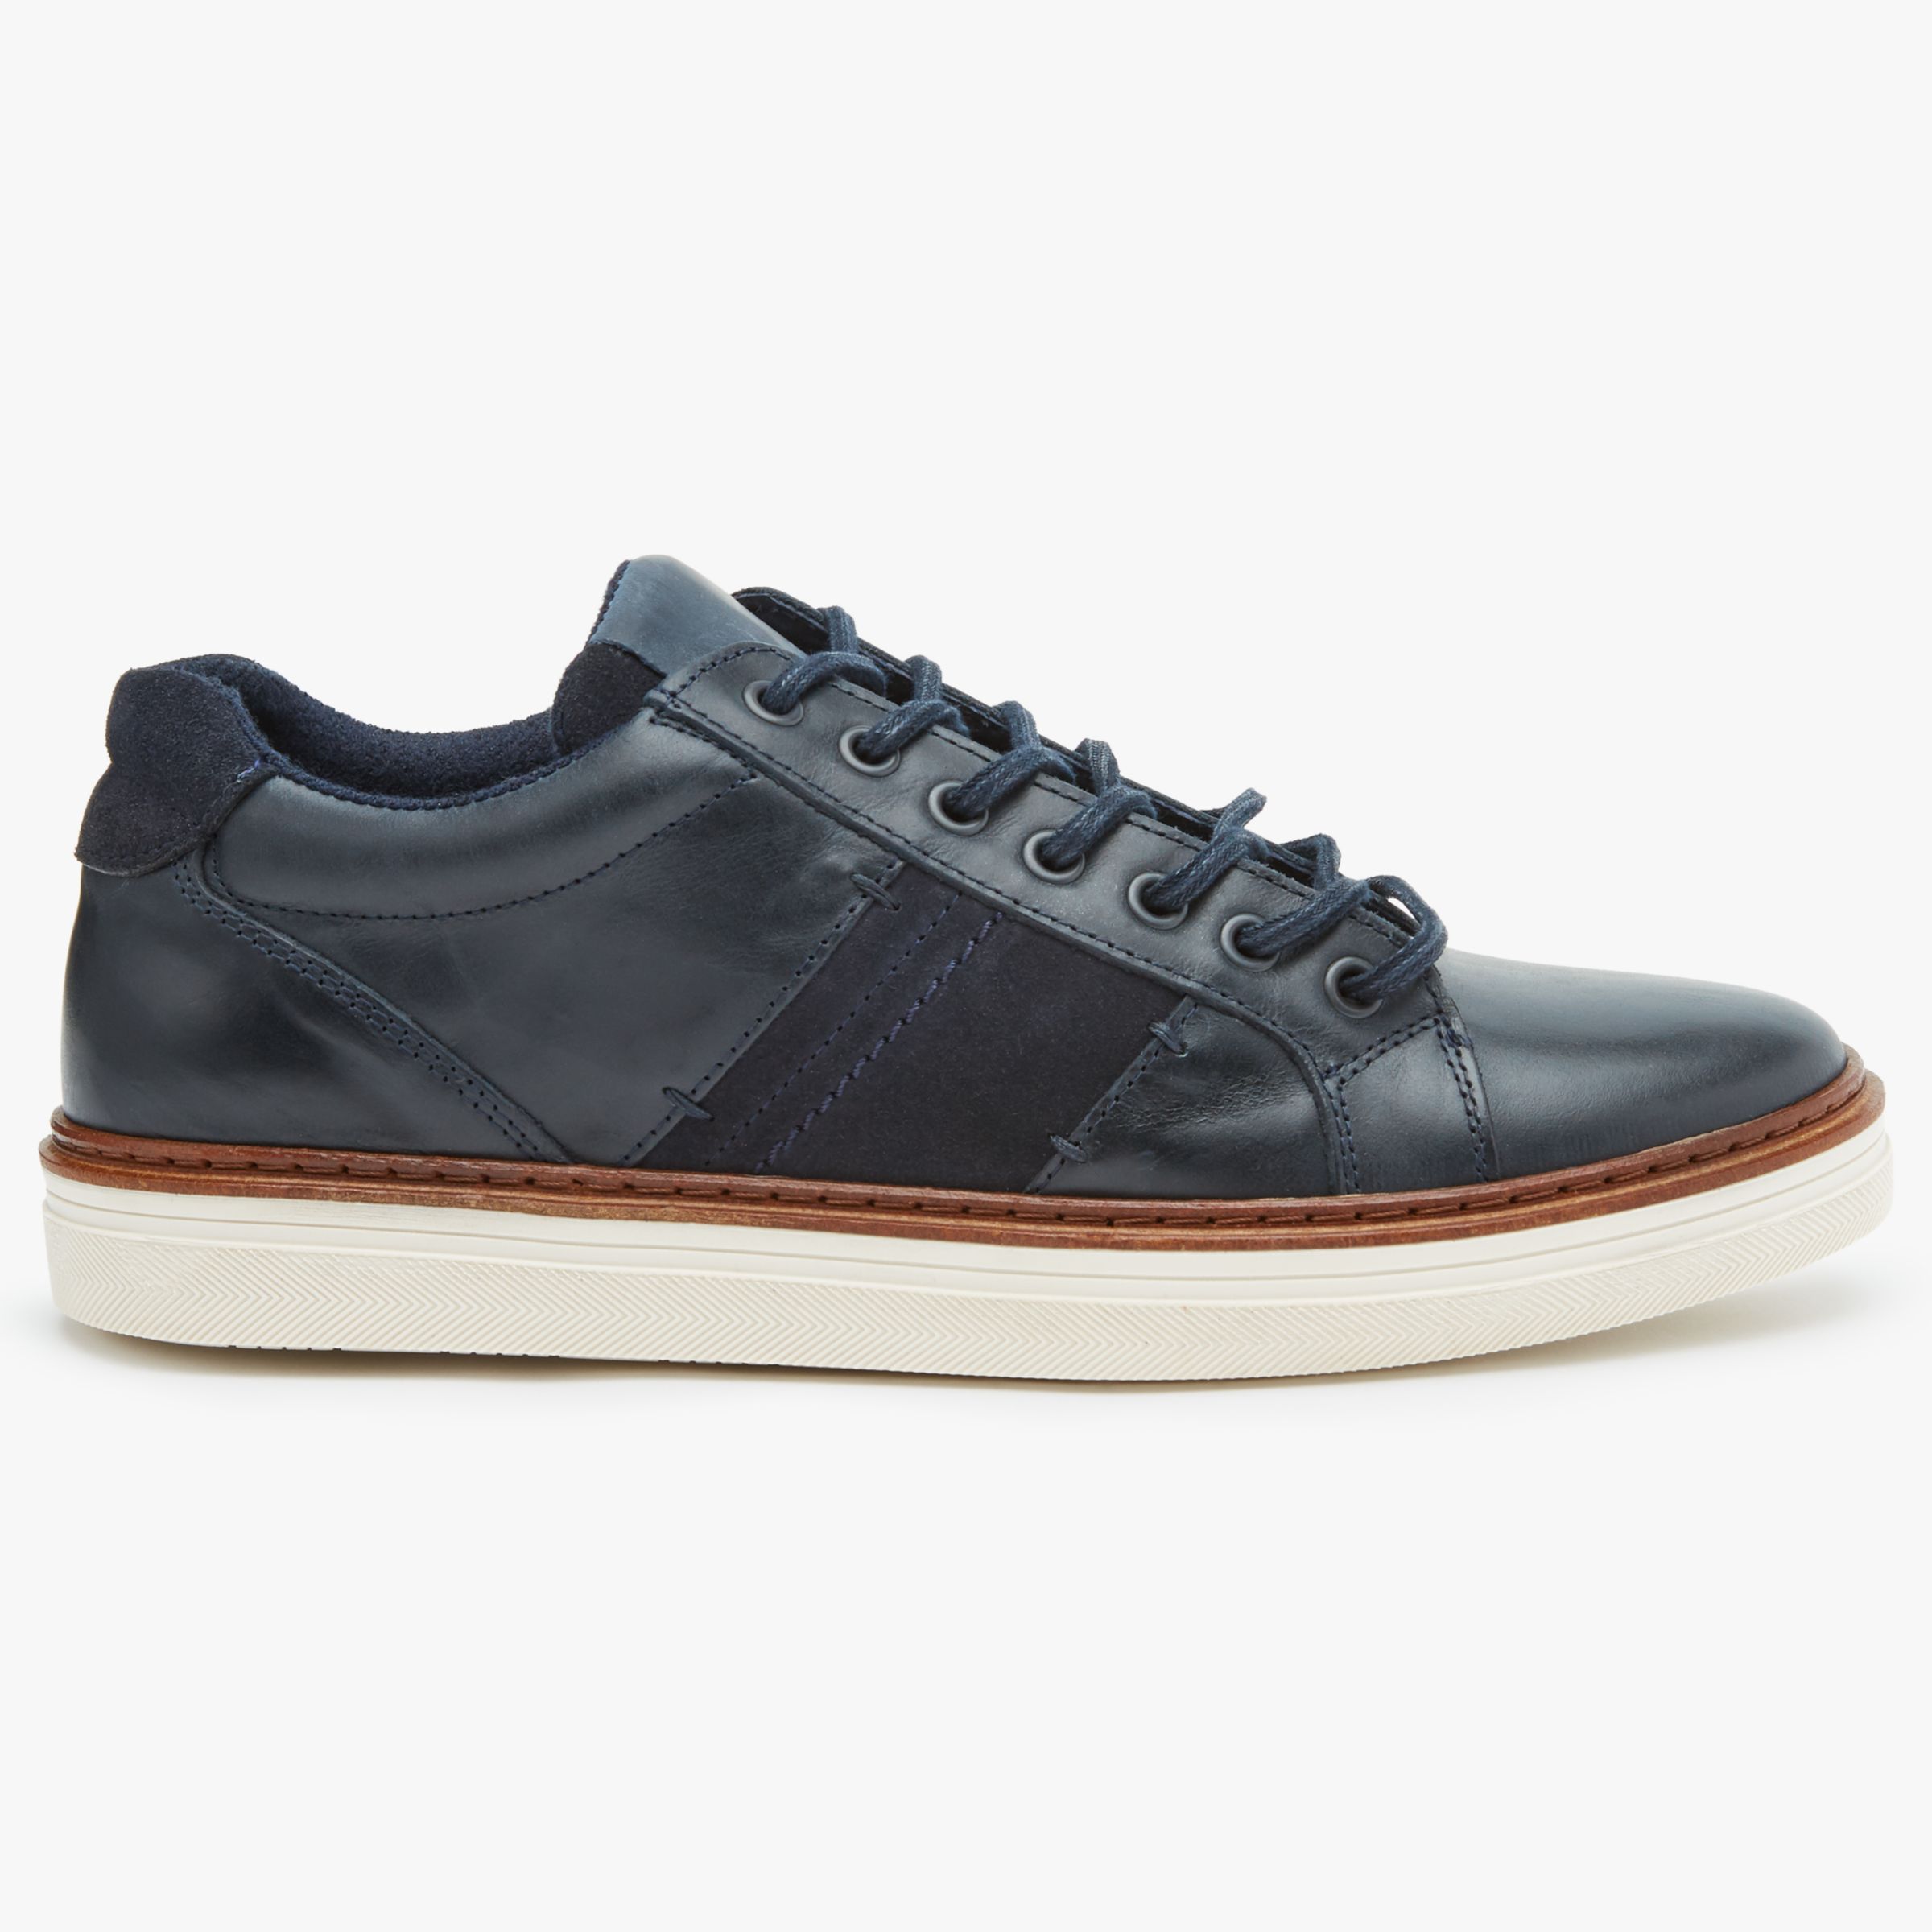 John Lewis & Partners Stamford Cupsole Leather Trainers, Navy, 7